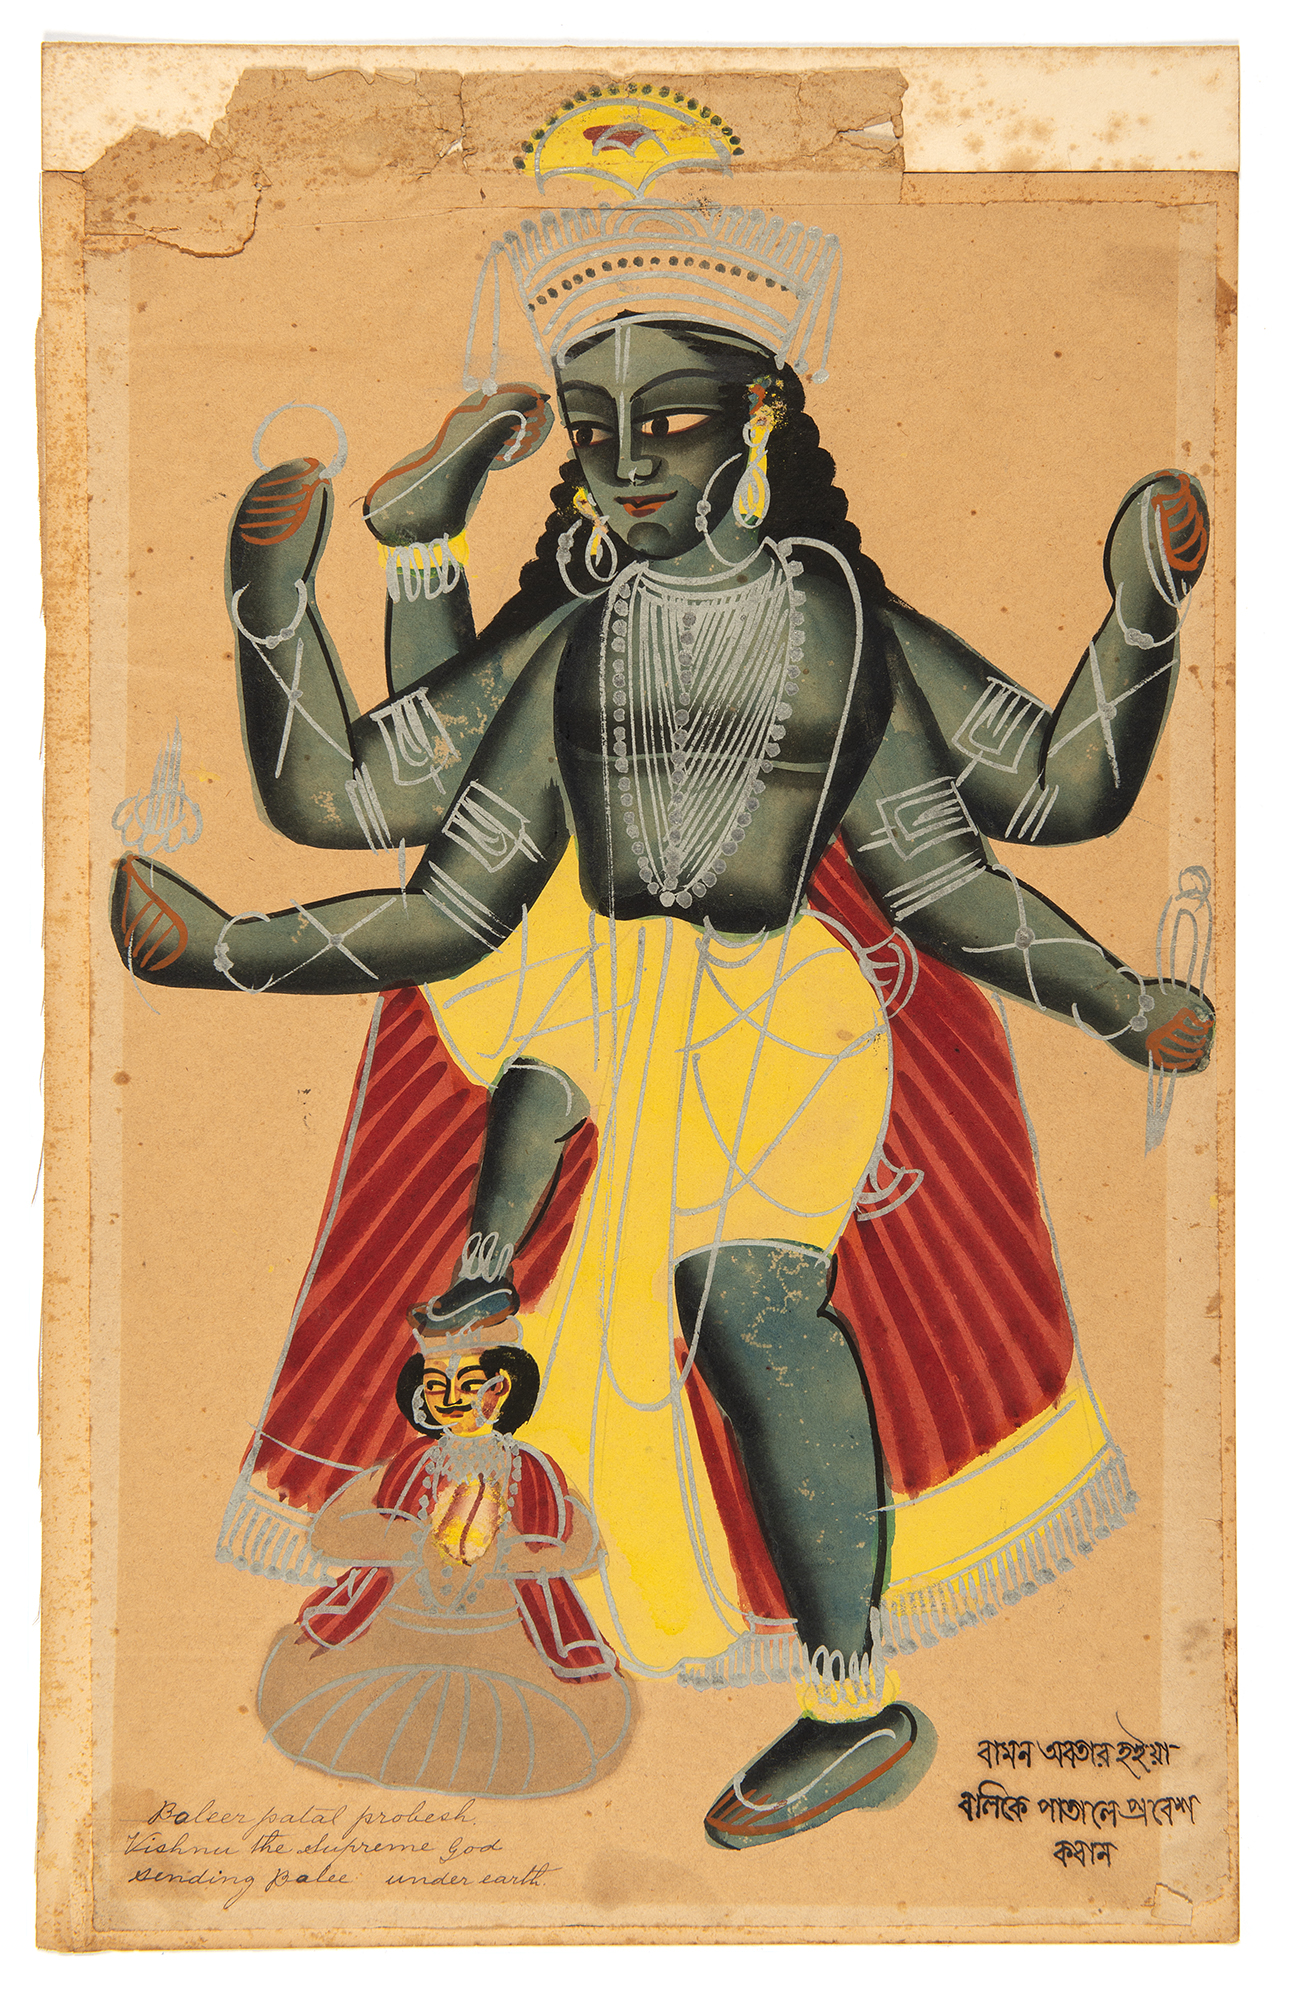 Painting of a figure with dark green screen and multiple arms outstretched, with a foot atop the head of a much smaller figure with yellow skin